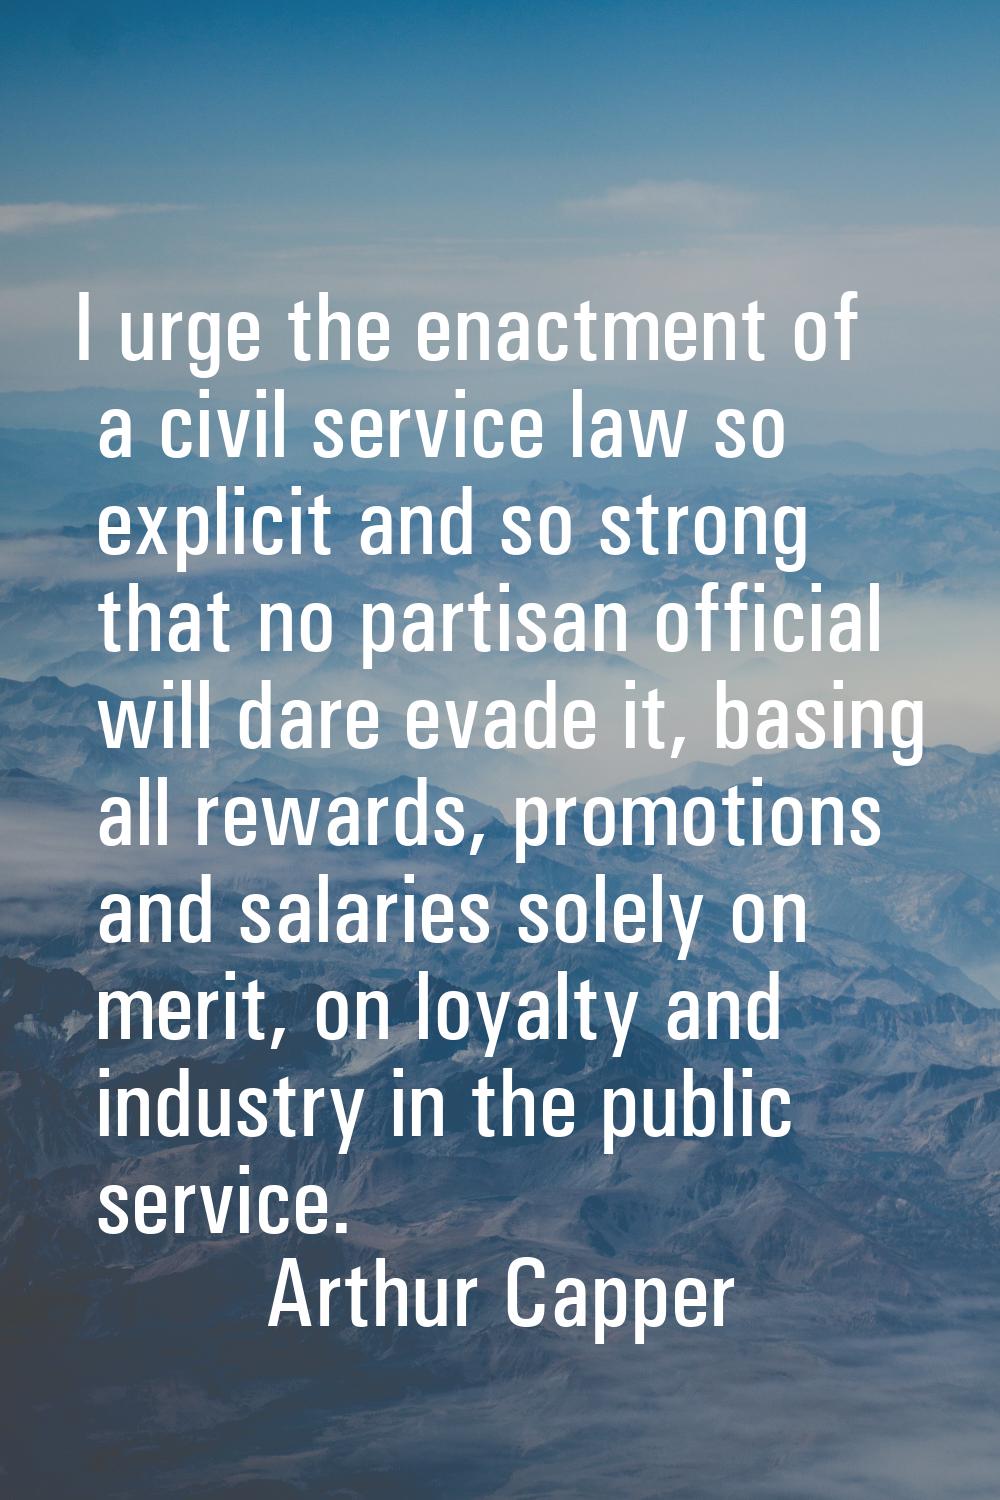 I urge the enactment of a civil service law so explicit and so strong that no partisan official wil